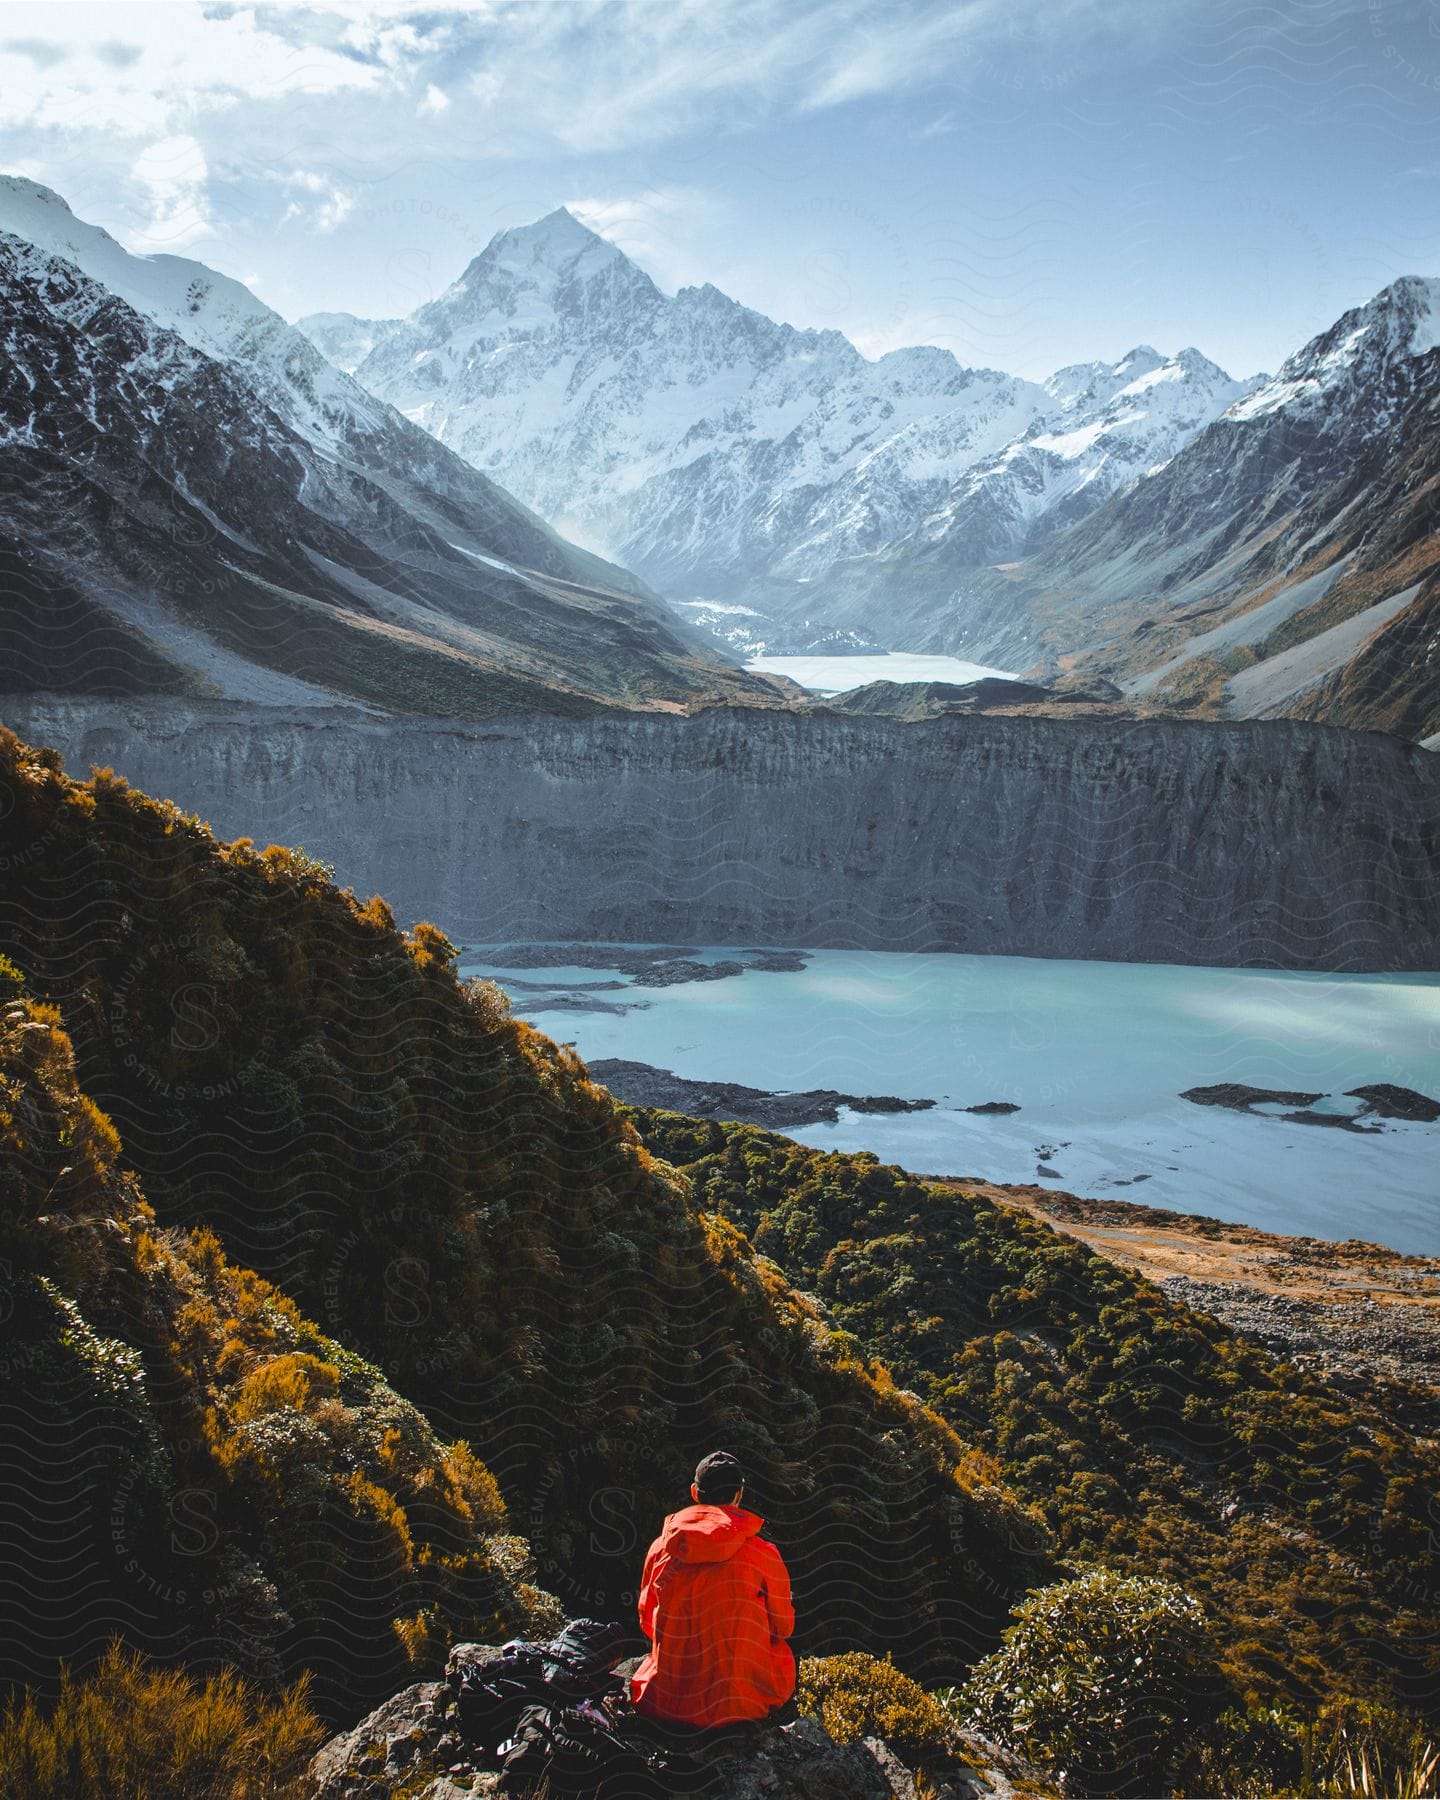 Hiker sits on a mountain overlooking a frozen lake with mountains in the distance